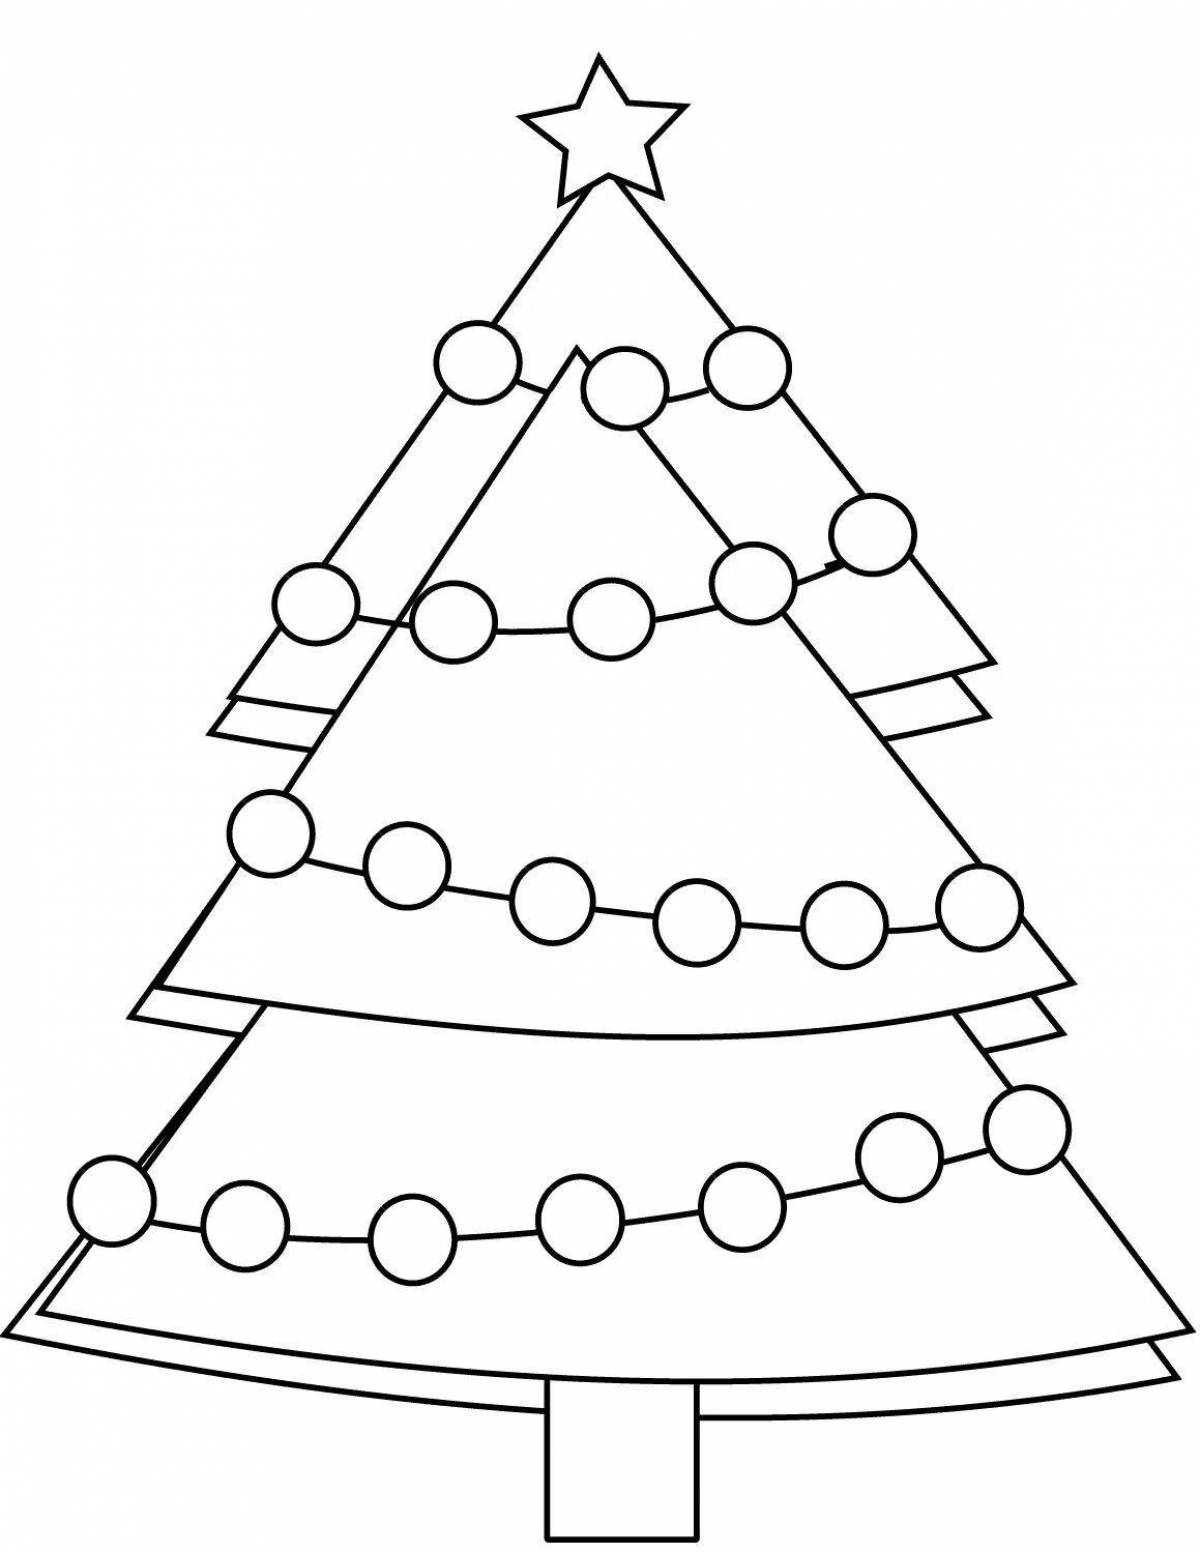 Colorful christmas tree coloring page for kids